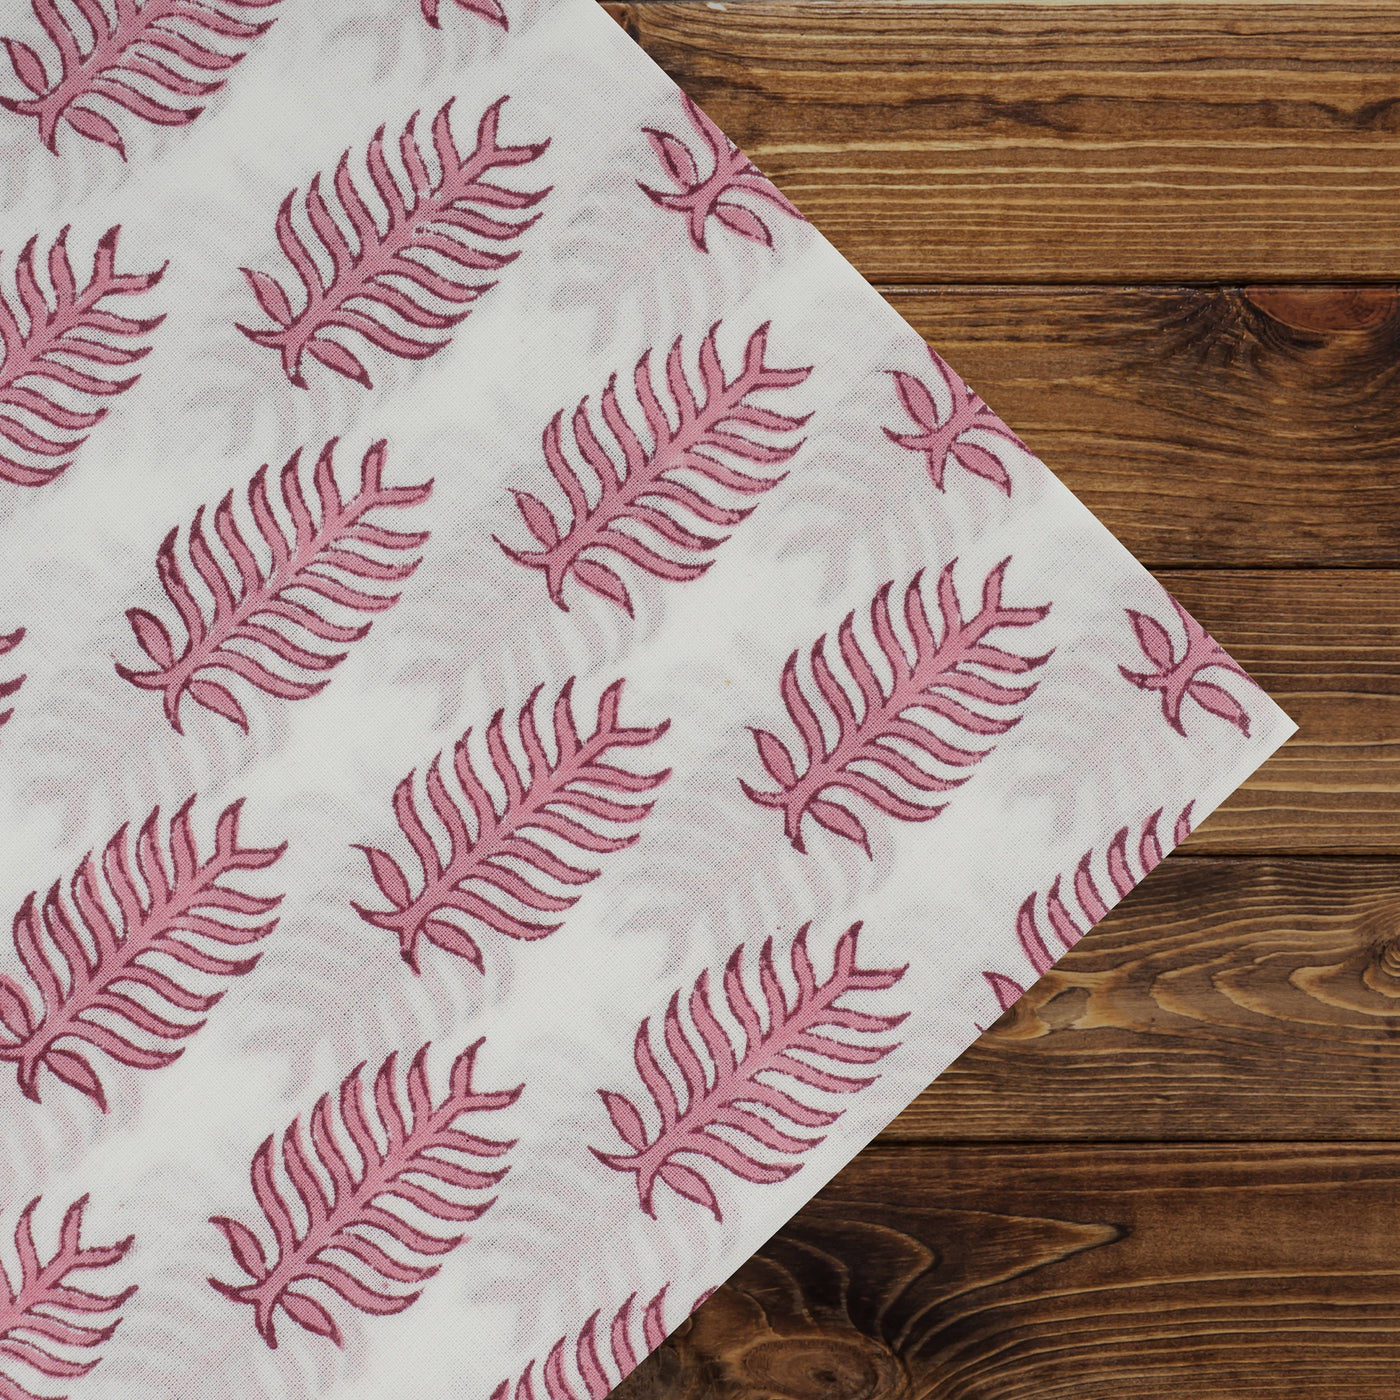 Taffy Pink and White Indian Hand Block Leaf Printed Pure Cotton Cloth Biodegradable Napkins, 18x18"- Cocktail Napkins, 20x20"- Dinner Napkins